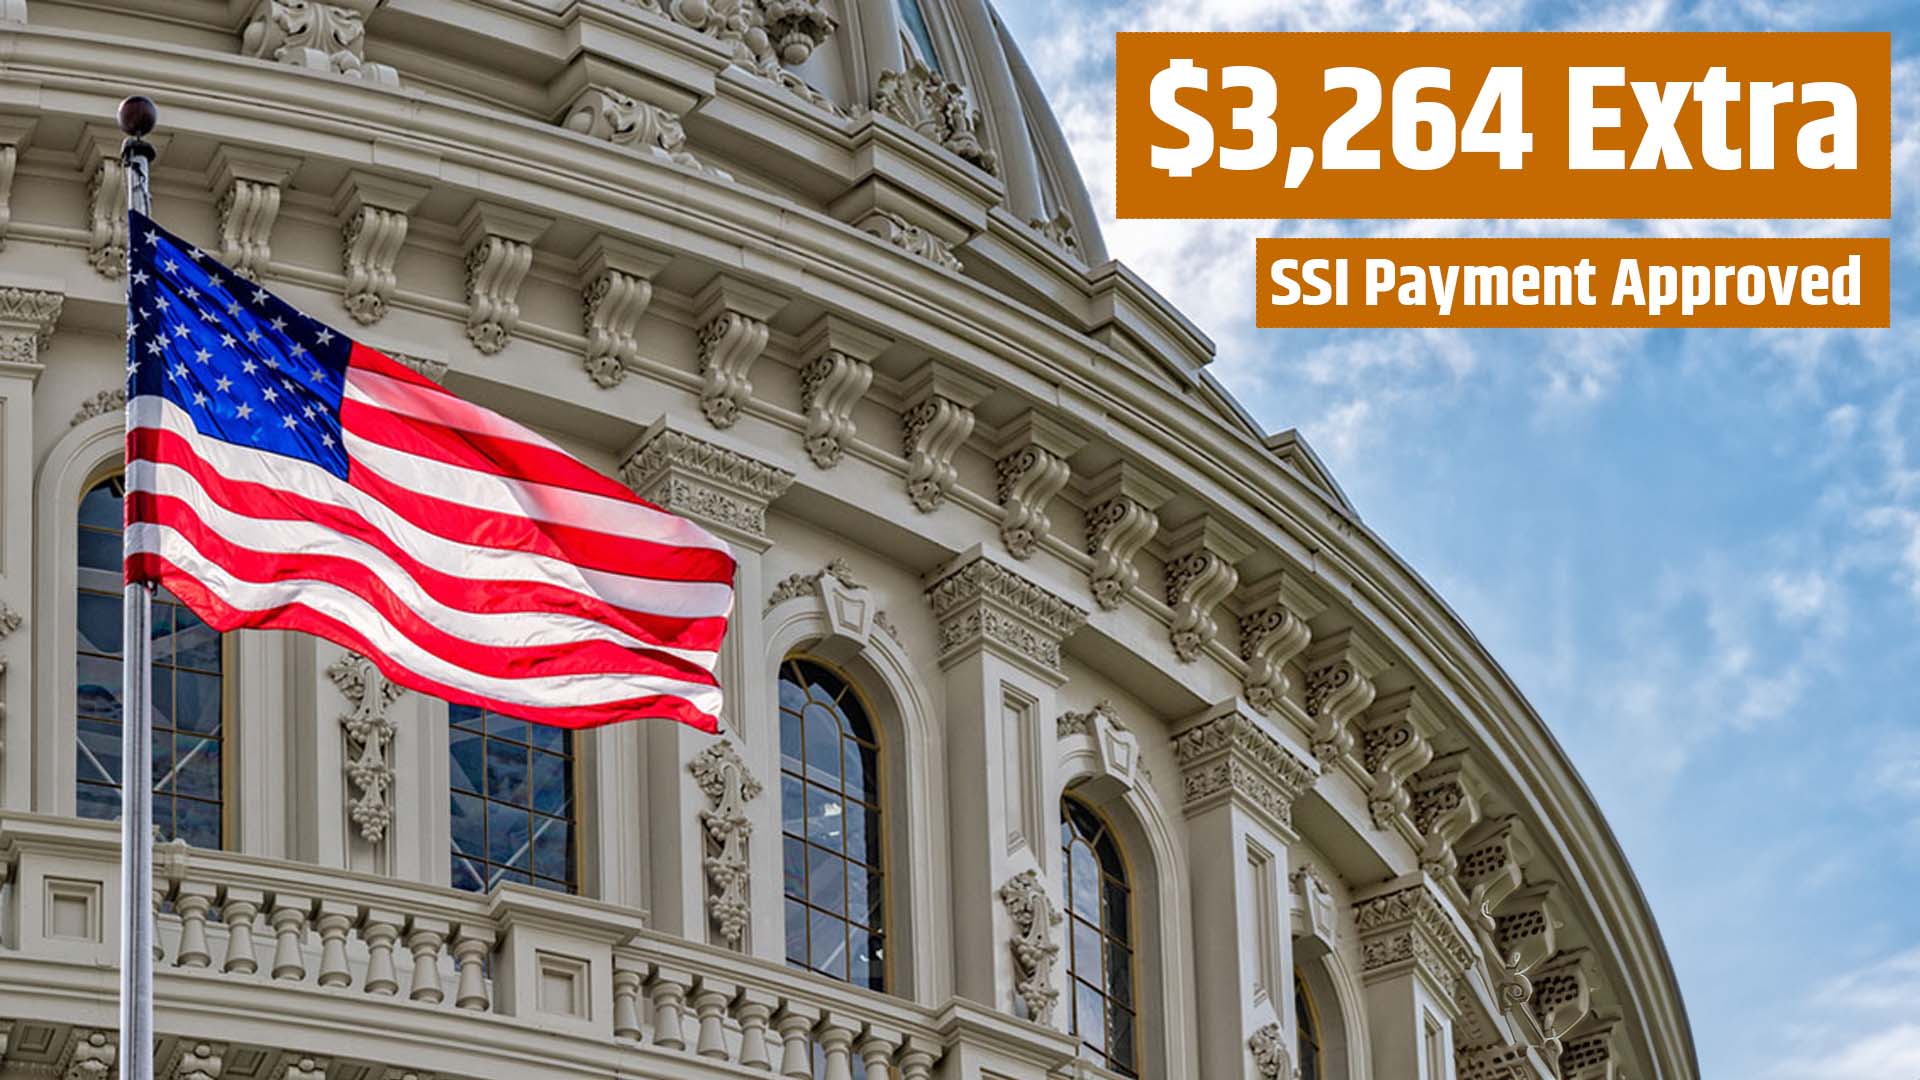 3,264 Extra SSI Payment Approved for 2024! Who is Receiving Additional